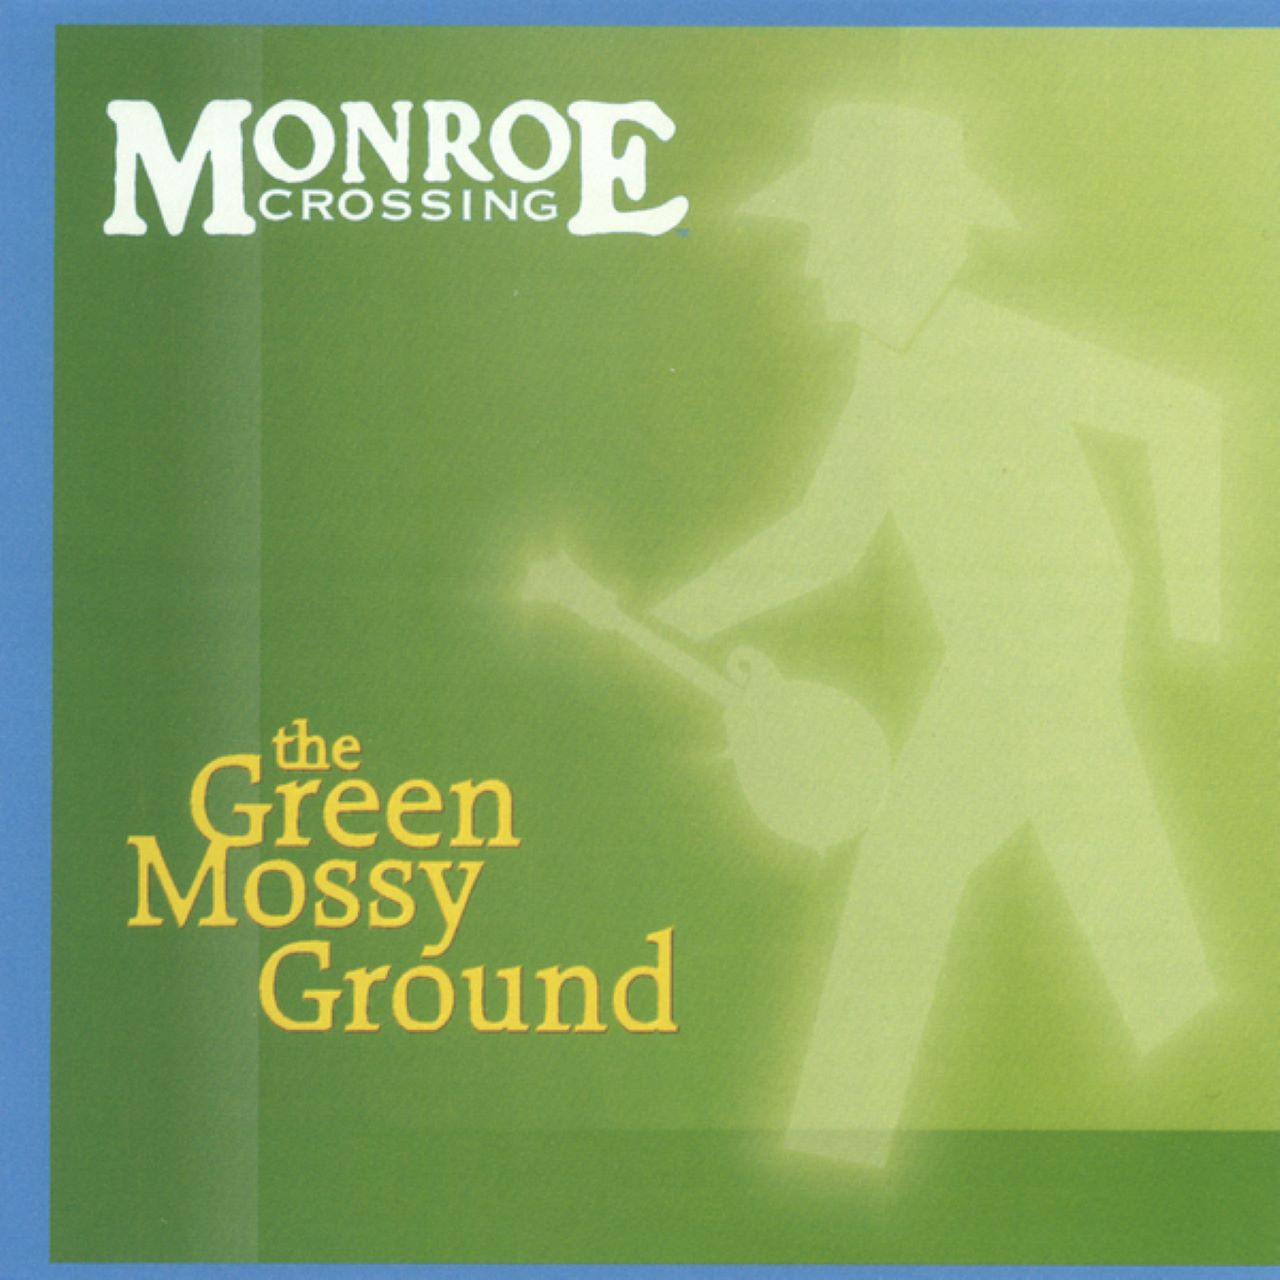 Monroe Crossing - The Green Mossy Ground cover album